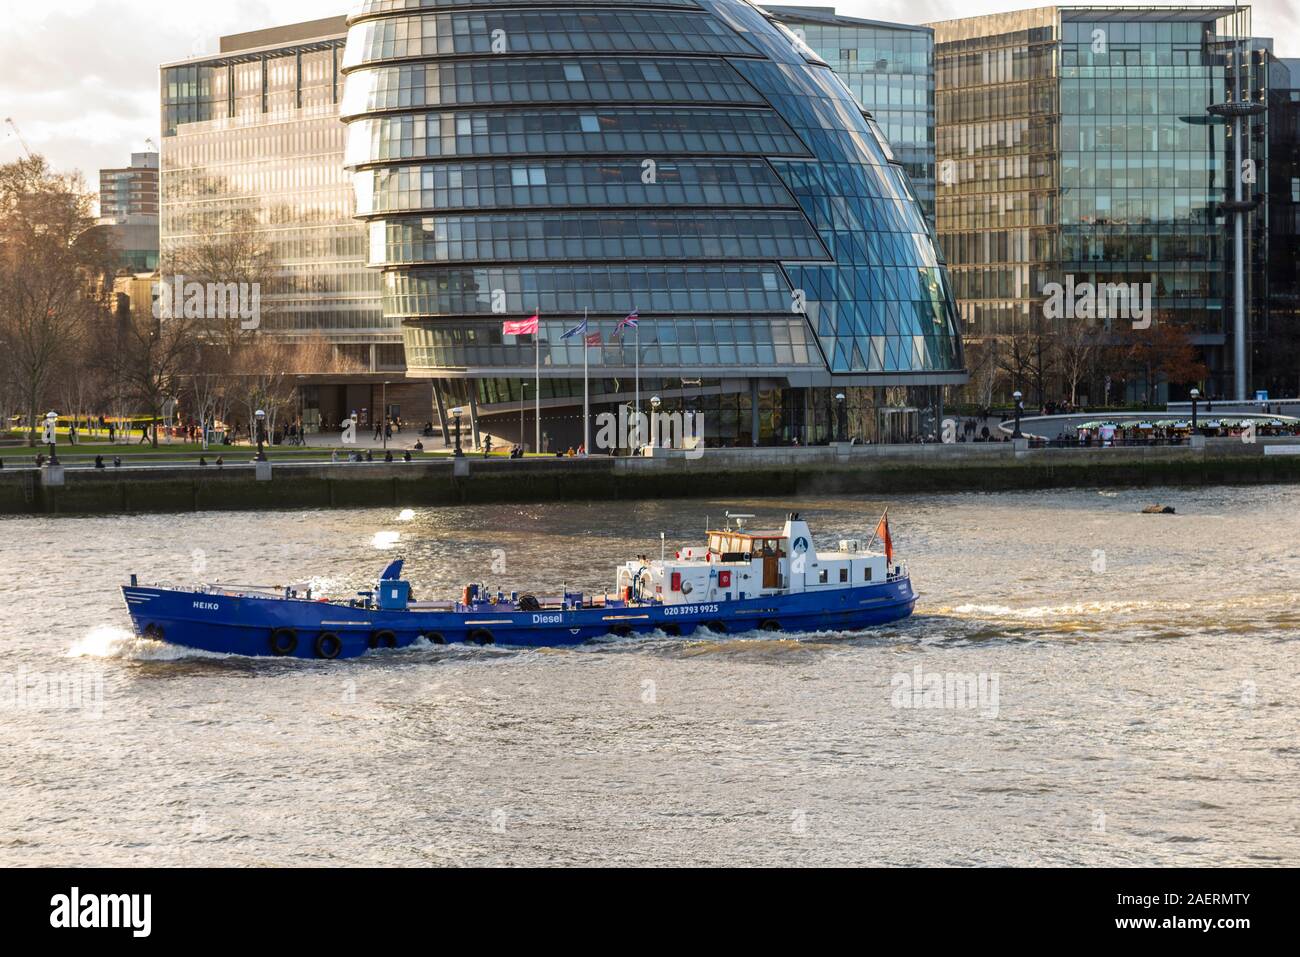 Vessel Heiko Motorised fuel tanker of Thames Marine Services on the River Thames, London, UK passing City Hall, Greater London Authority HQ Stock Photo